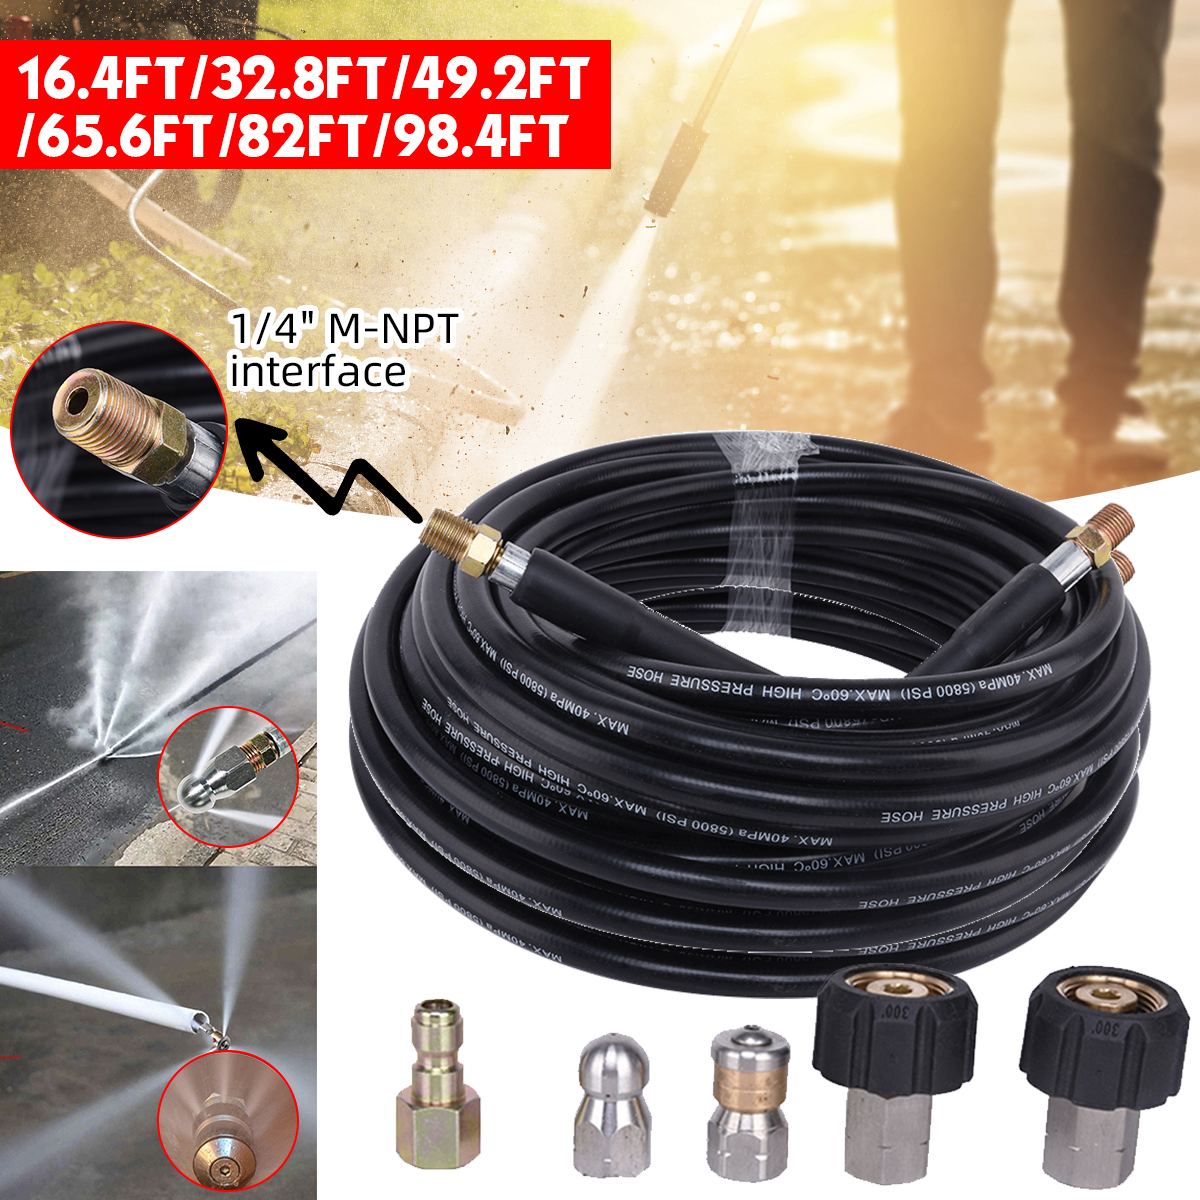 5-30m-14quot-M-NPT-Hose-Sewer-Line-And-Drain-Jetter-Kit-W-Sewer-Nozzle--Adapter-1717545-2